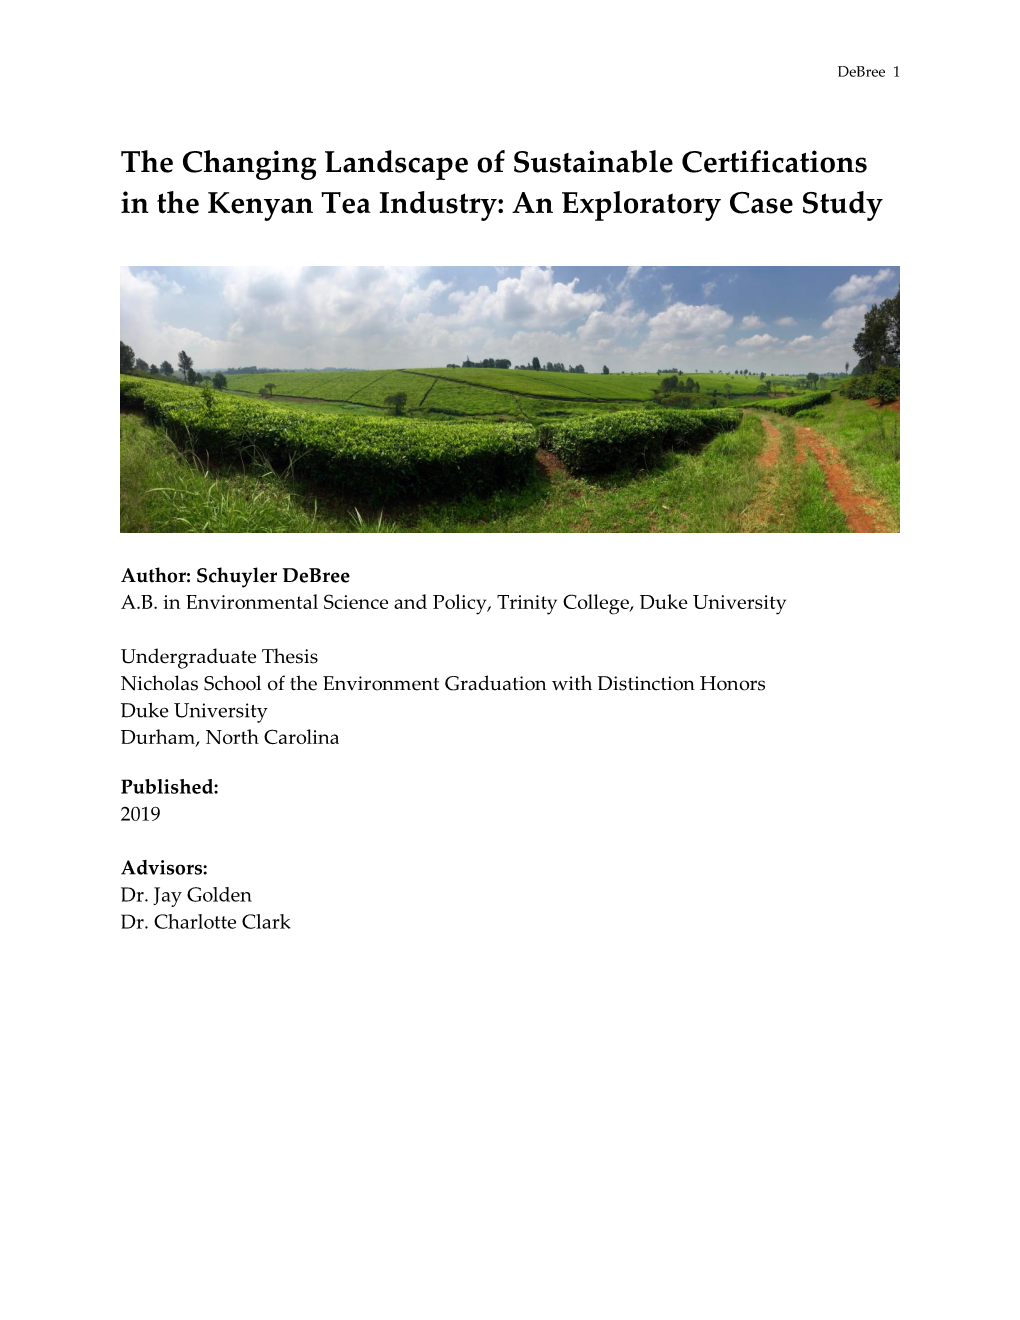 The Changing Landscape of Sustainable Certifications in the Kenyan Tea Industry: an Exploratory Case Study